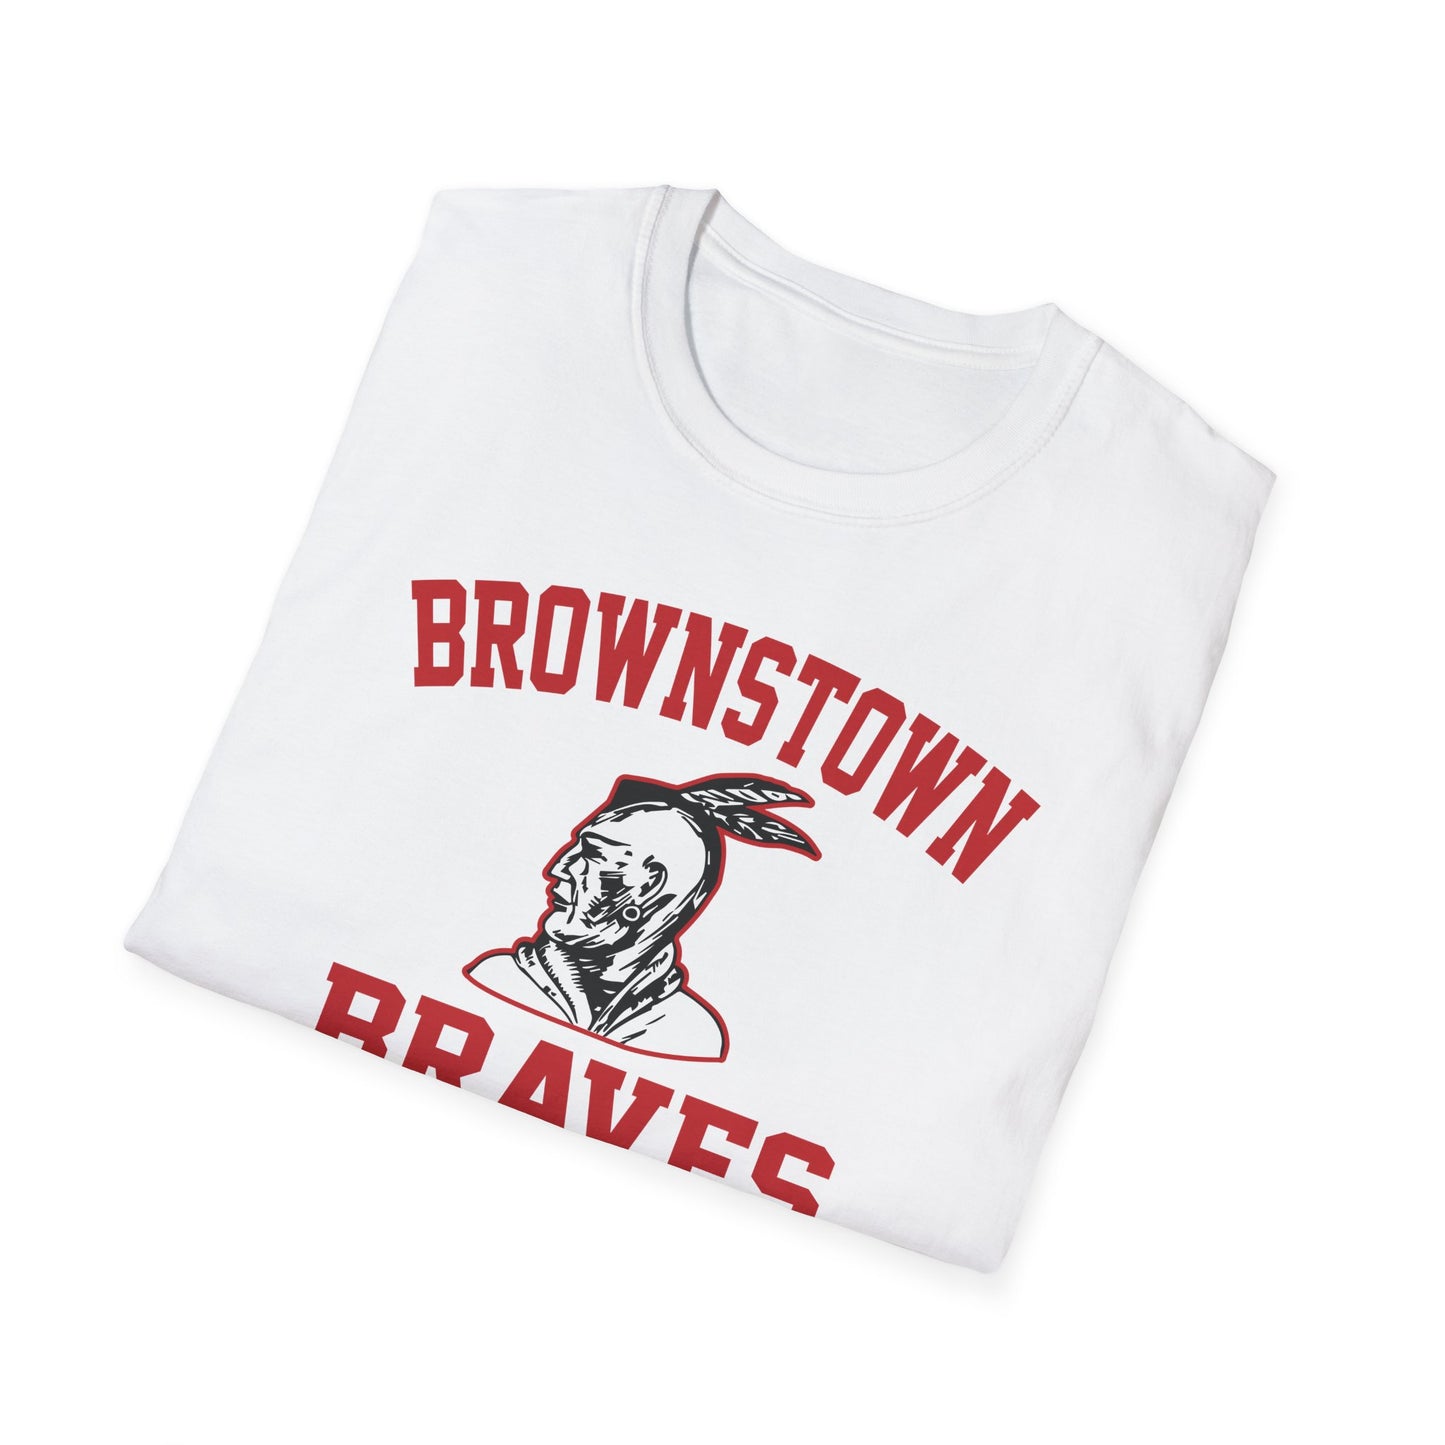 Brownstown Braves Unisex Softstyle T-Shirt